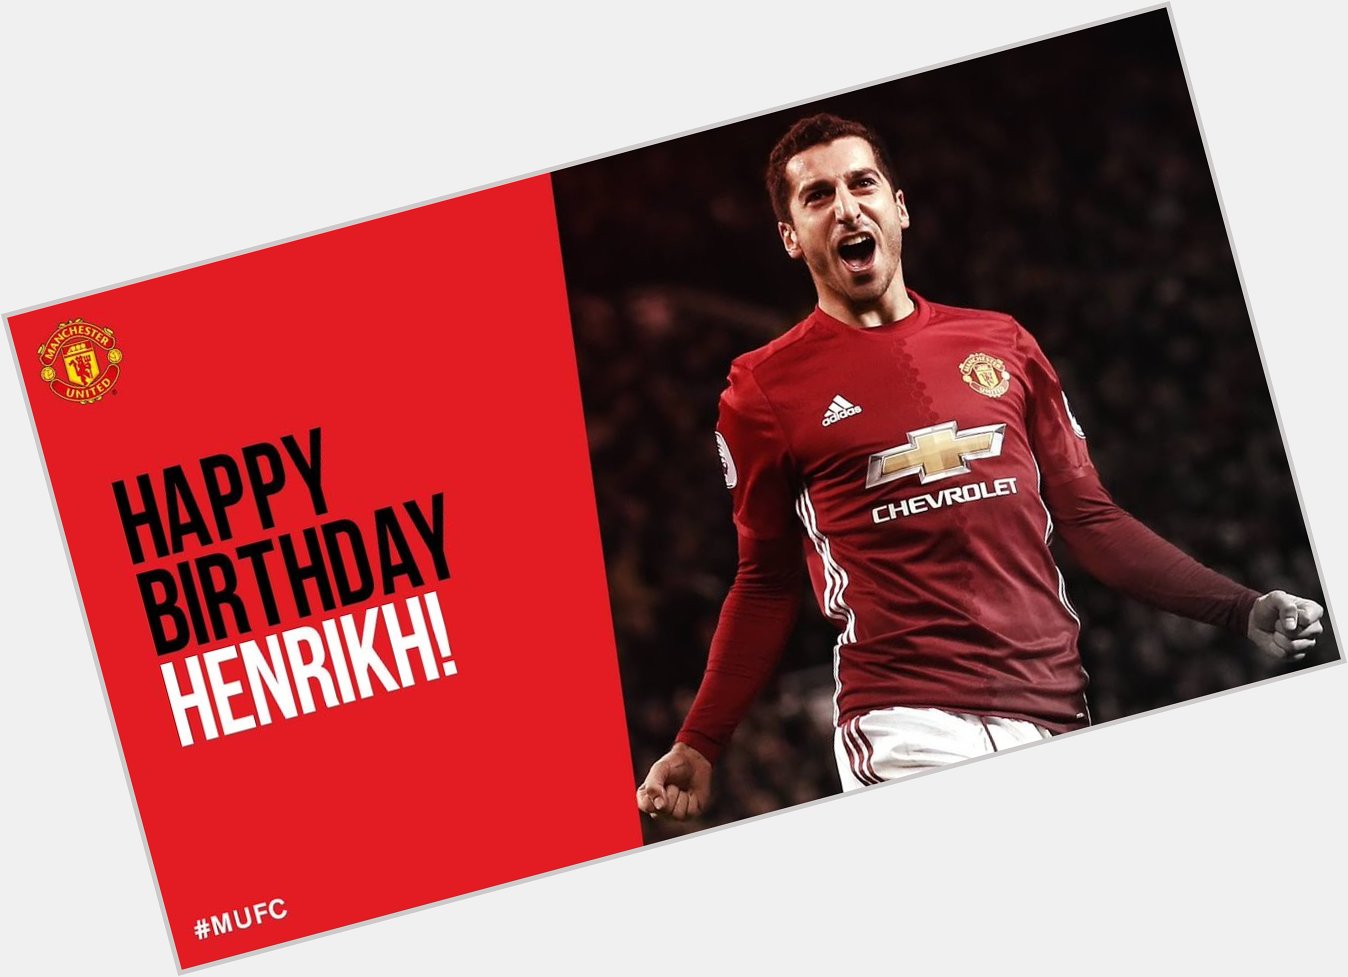   No announcement that hes officially left the club. Happy birthday Henrikh Mkhitaryan. 